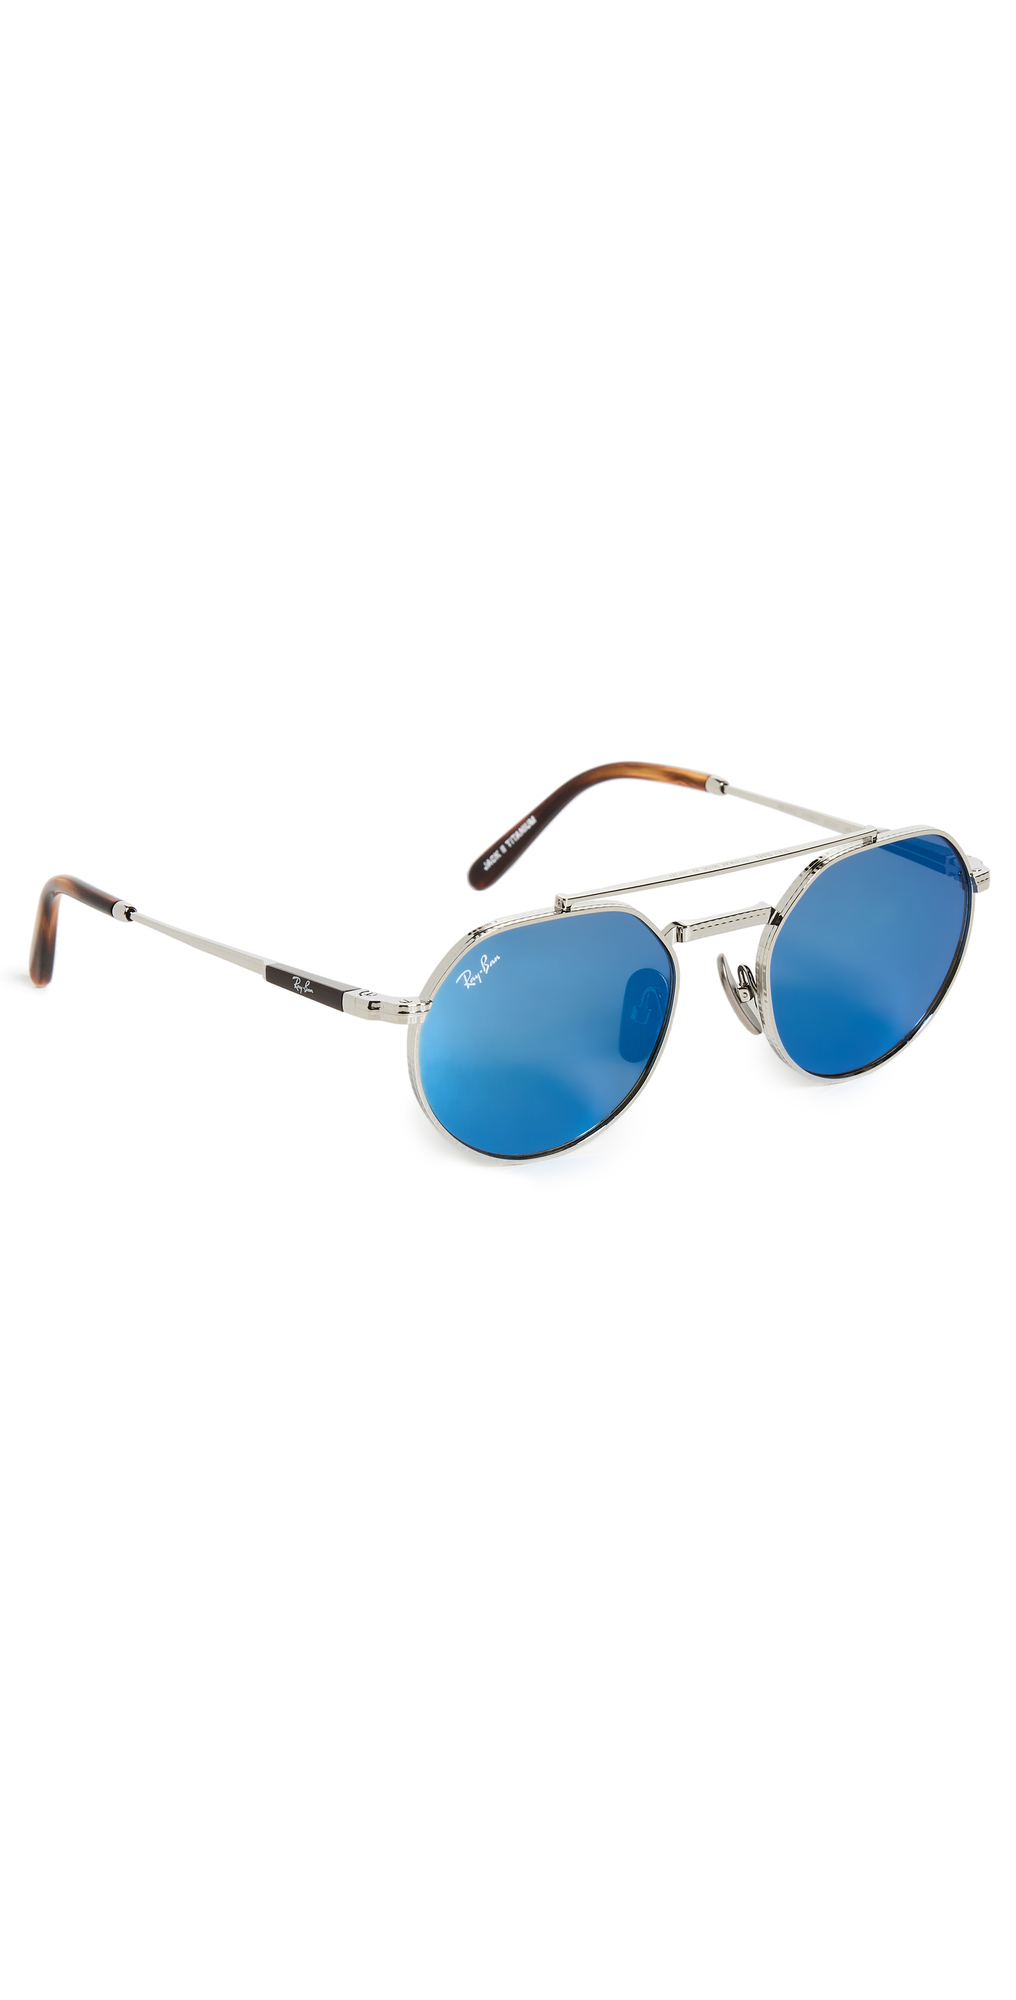 Ray-Ban Round Sunglasses in blue / grey / silver